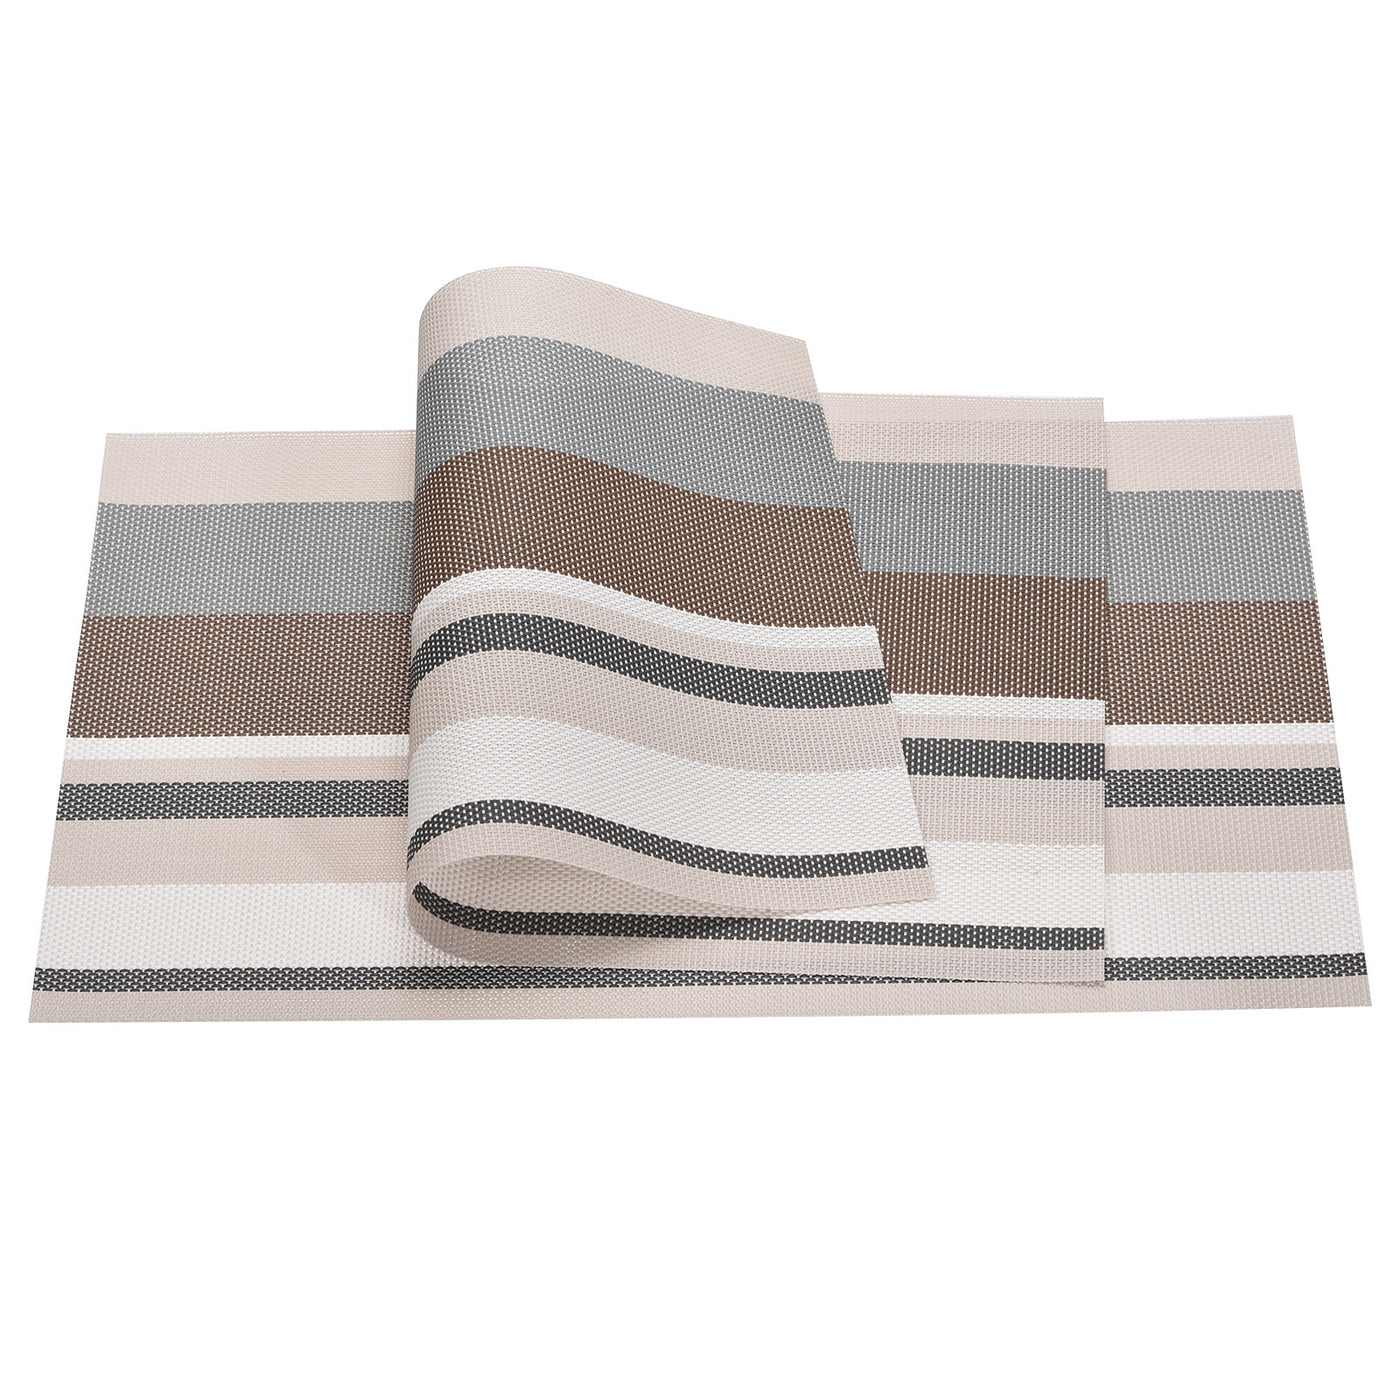 uxcell Uxcell Place Mats 450x300mm 6pcs PVC Table Washable Woven Placemat, Stripe Beige